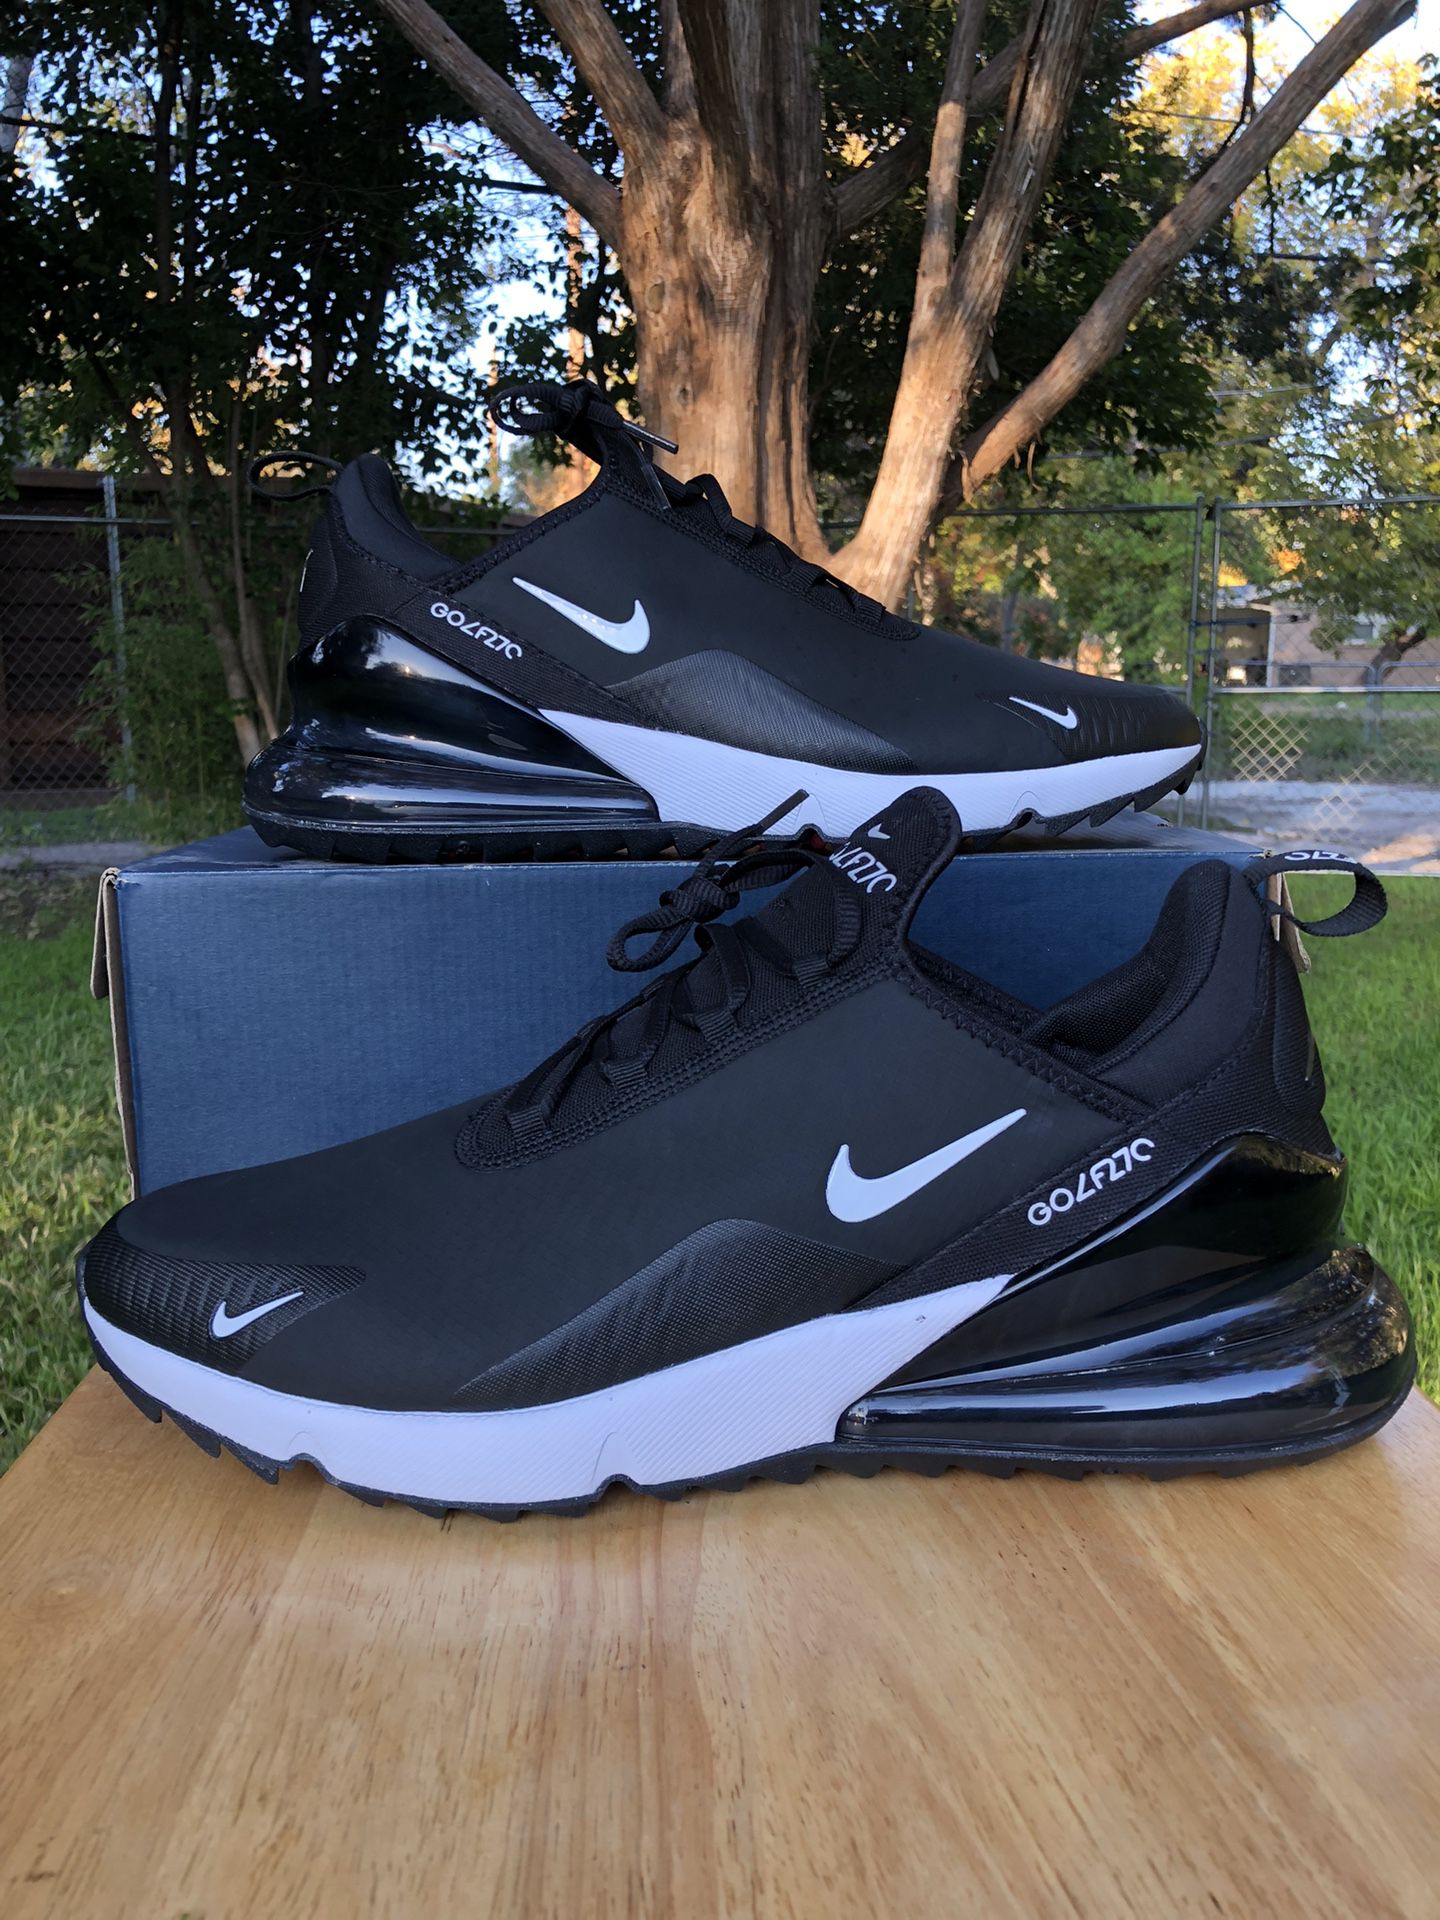 Nike Air Max 270 G Golf Shoes Black White Hot Punch CK6483-001 Size 13